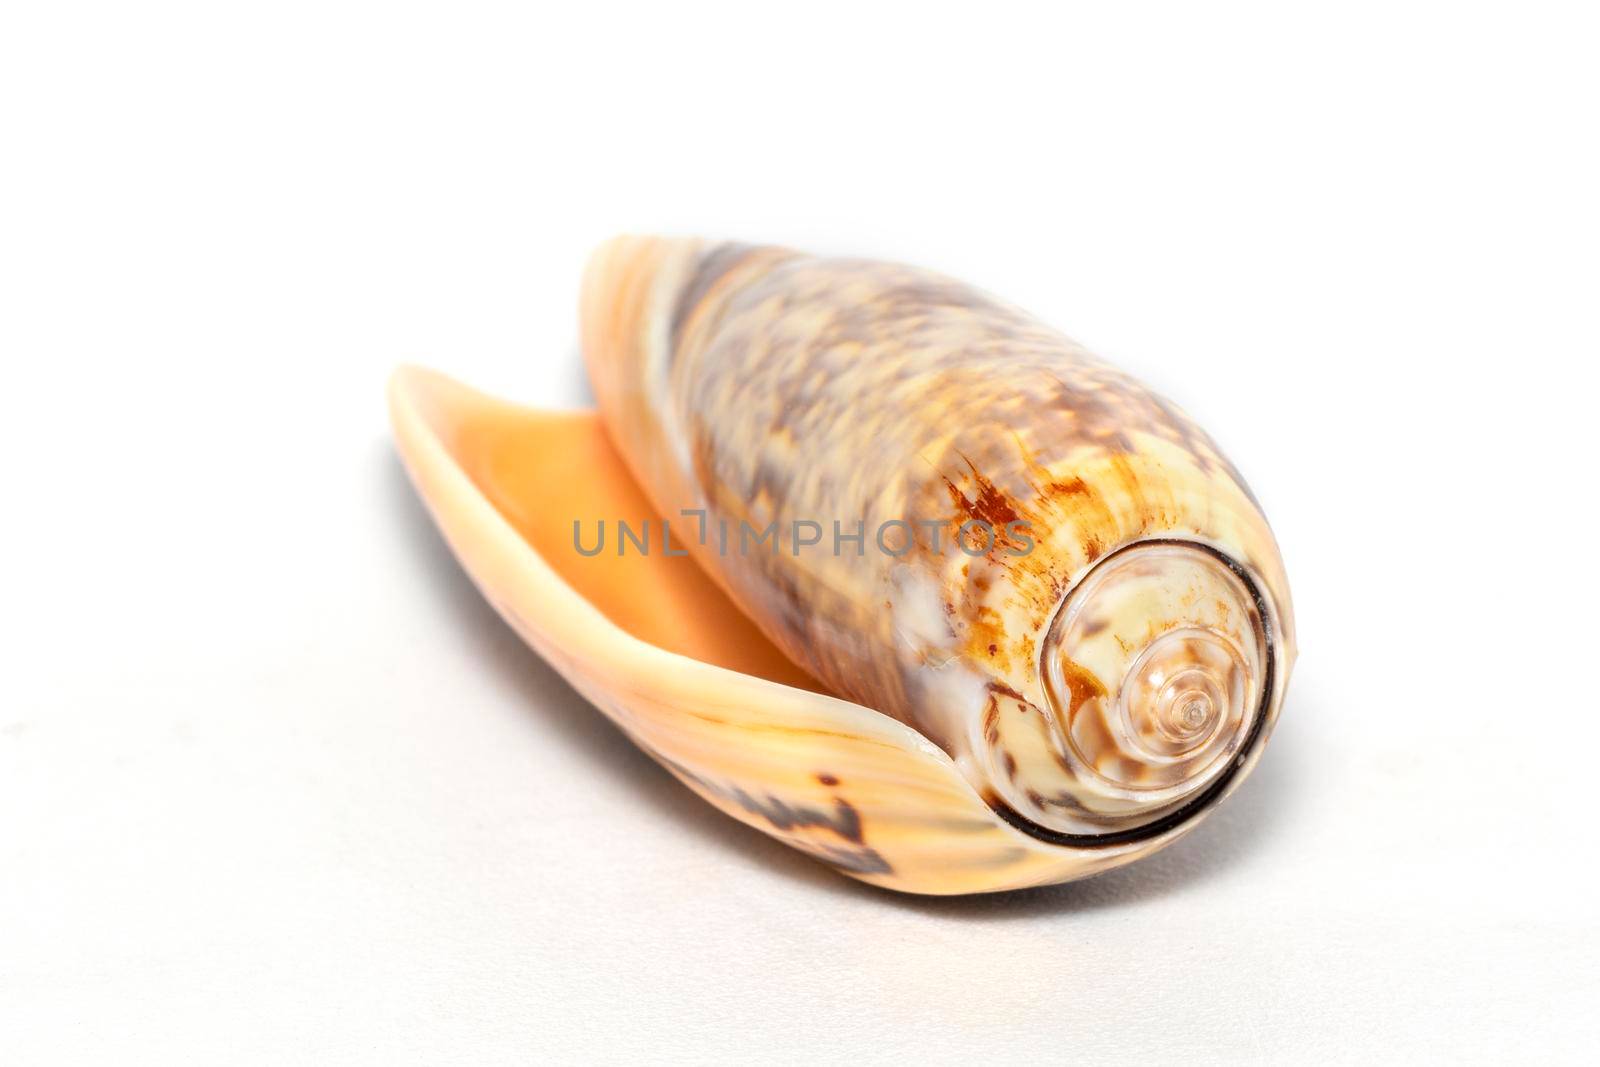 Image of cone snail shells or Cone shell on a white background. Undersea Animals. Sea shells.